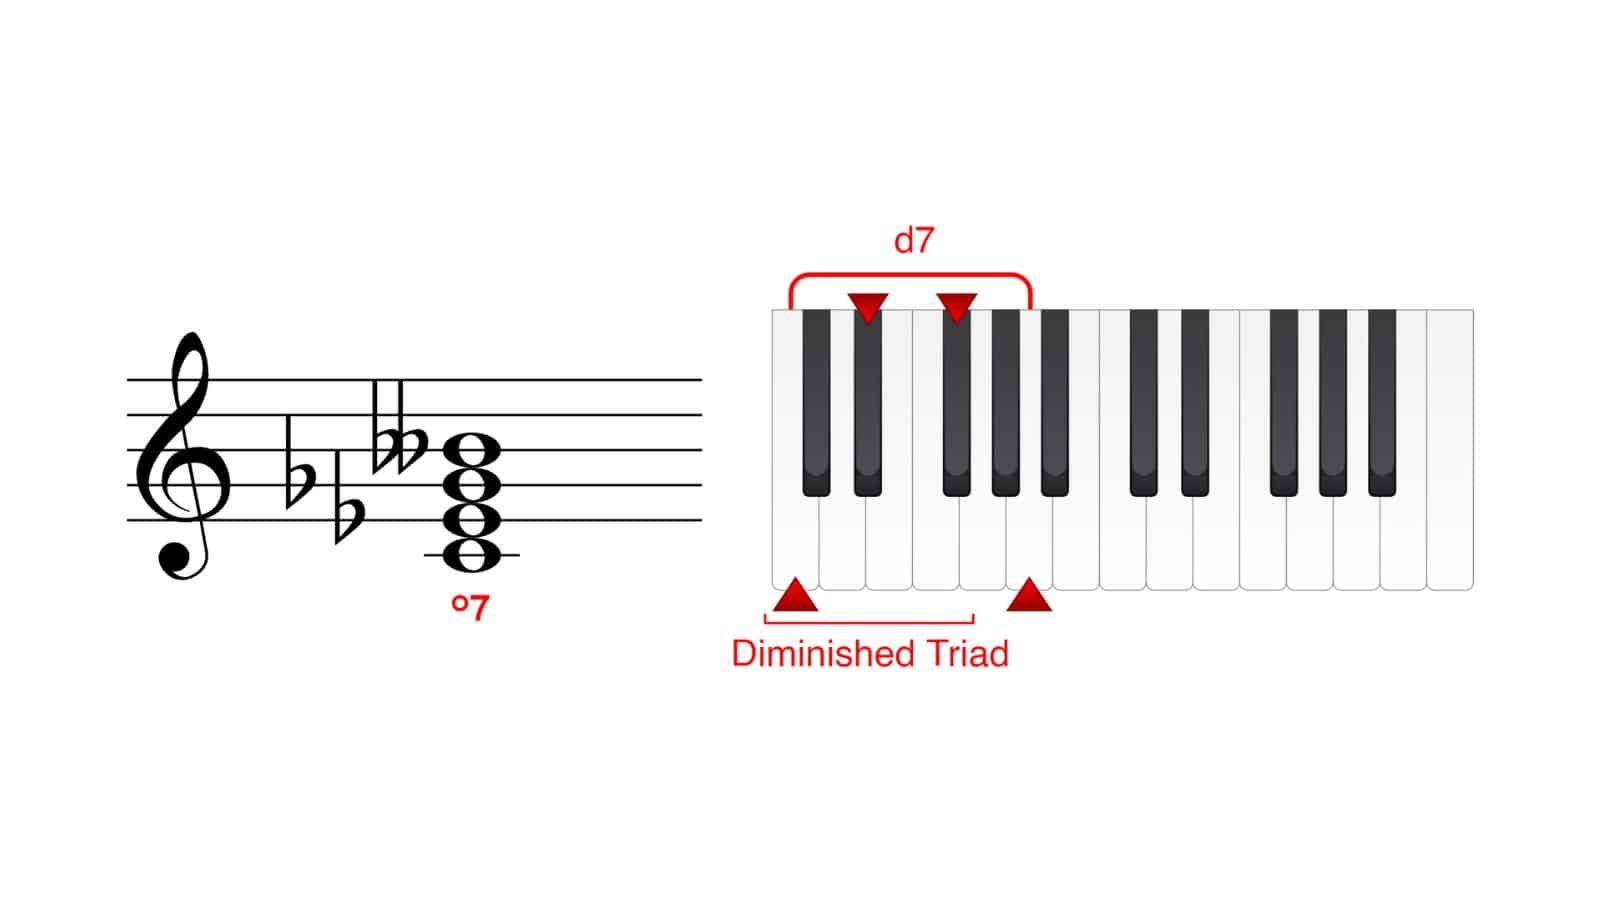 C diminished seventh chord